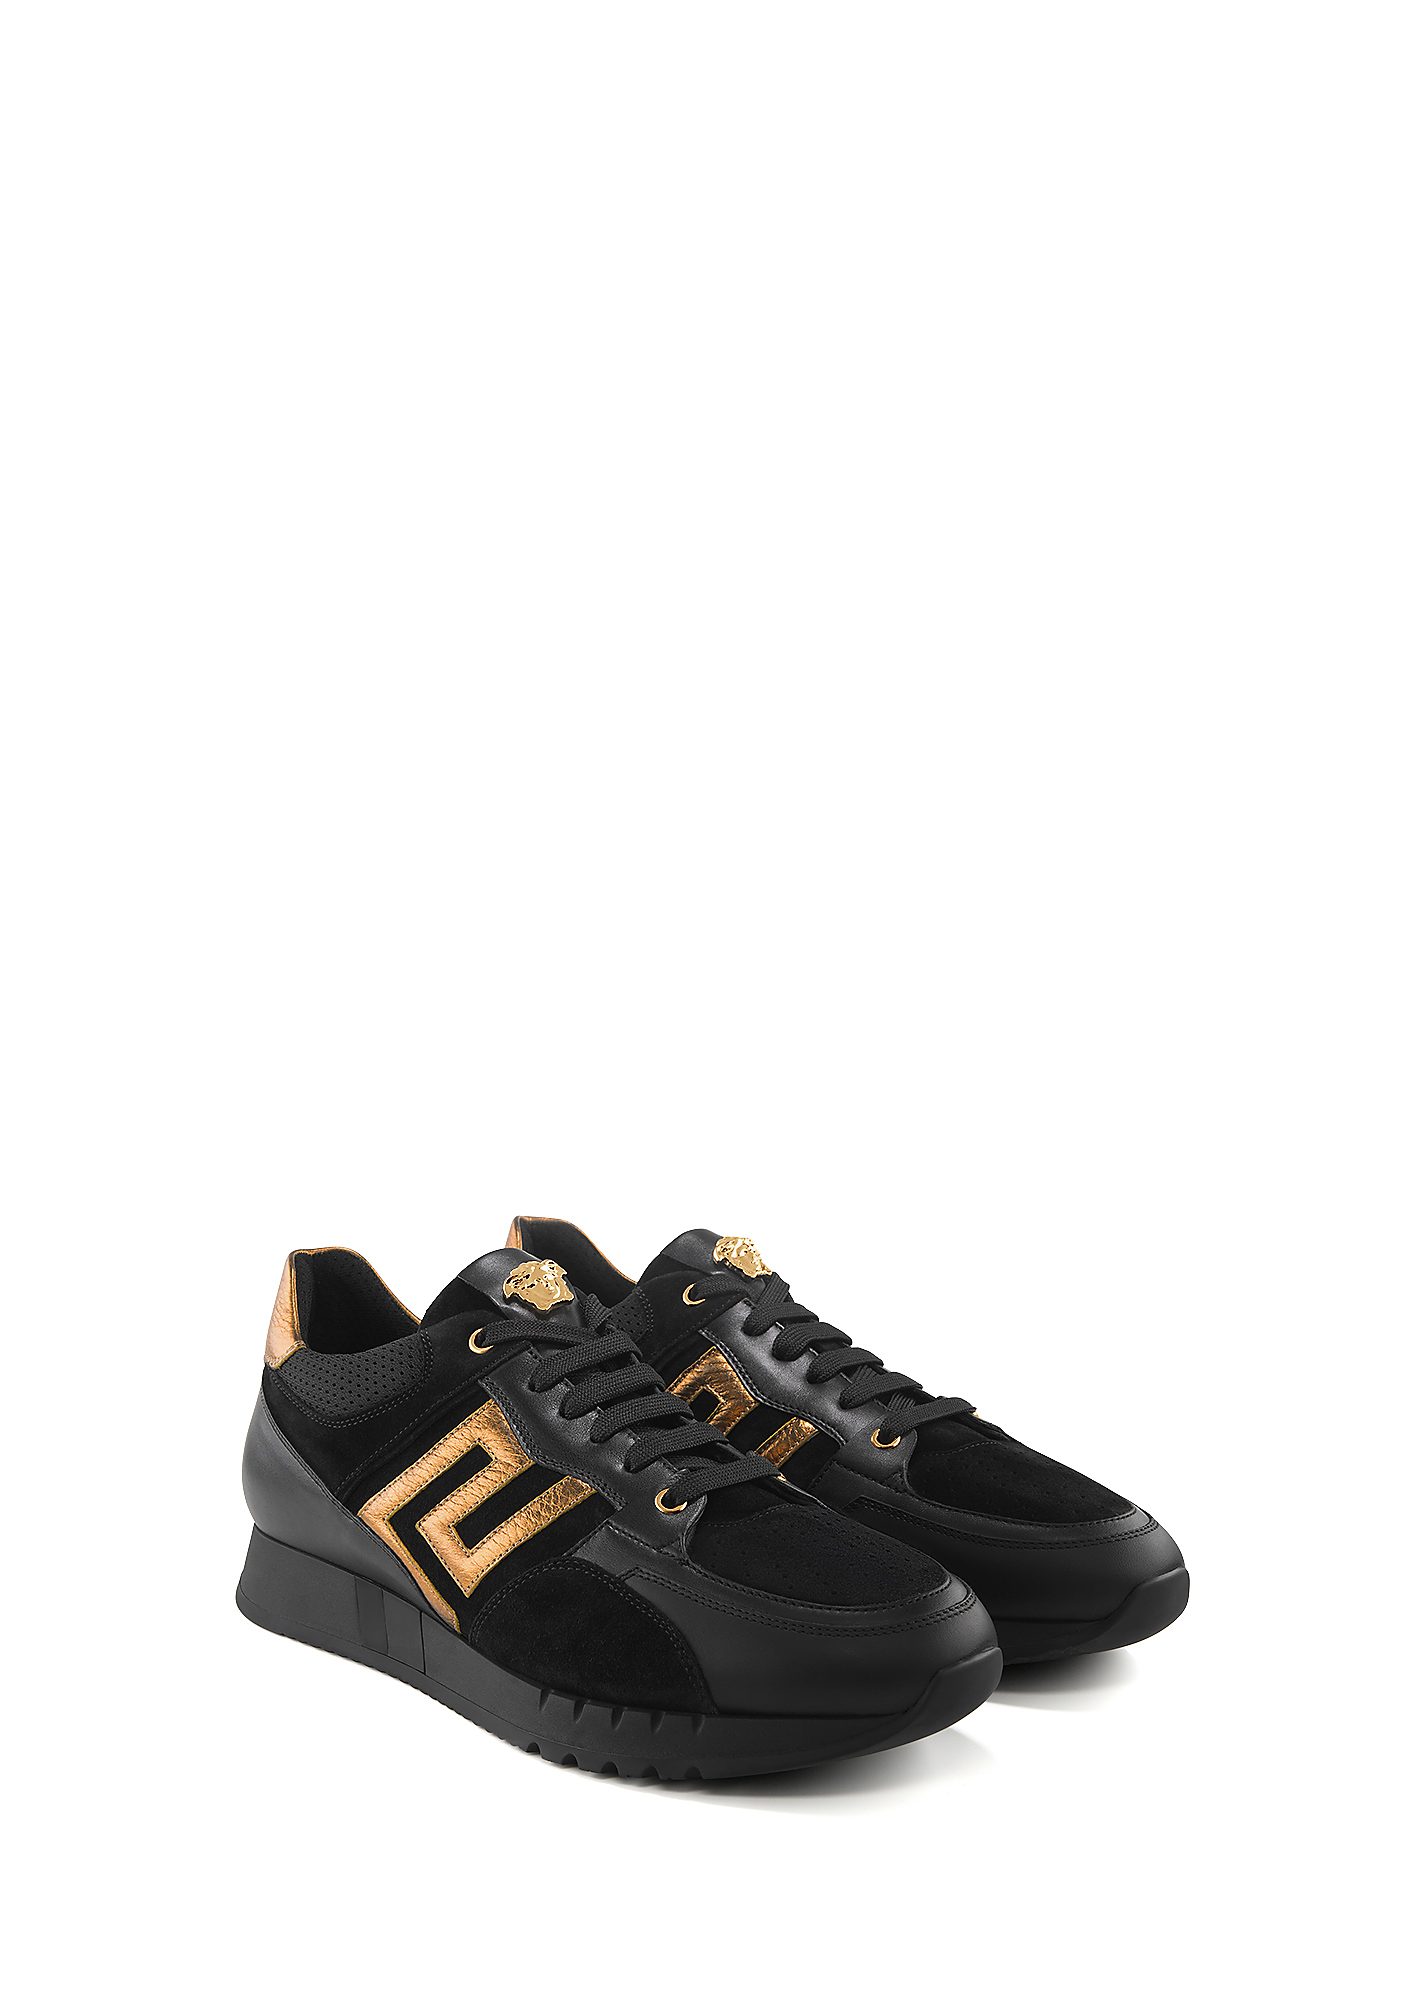 white and gold versace shoes